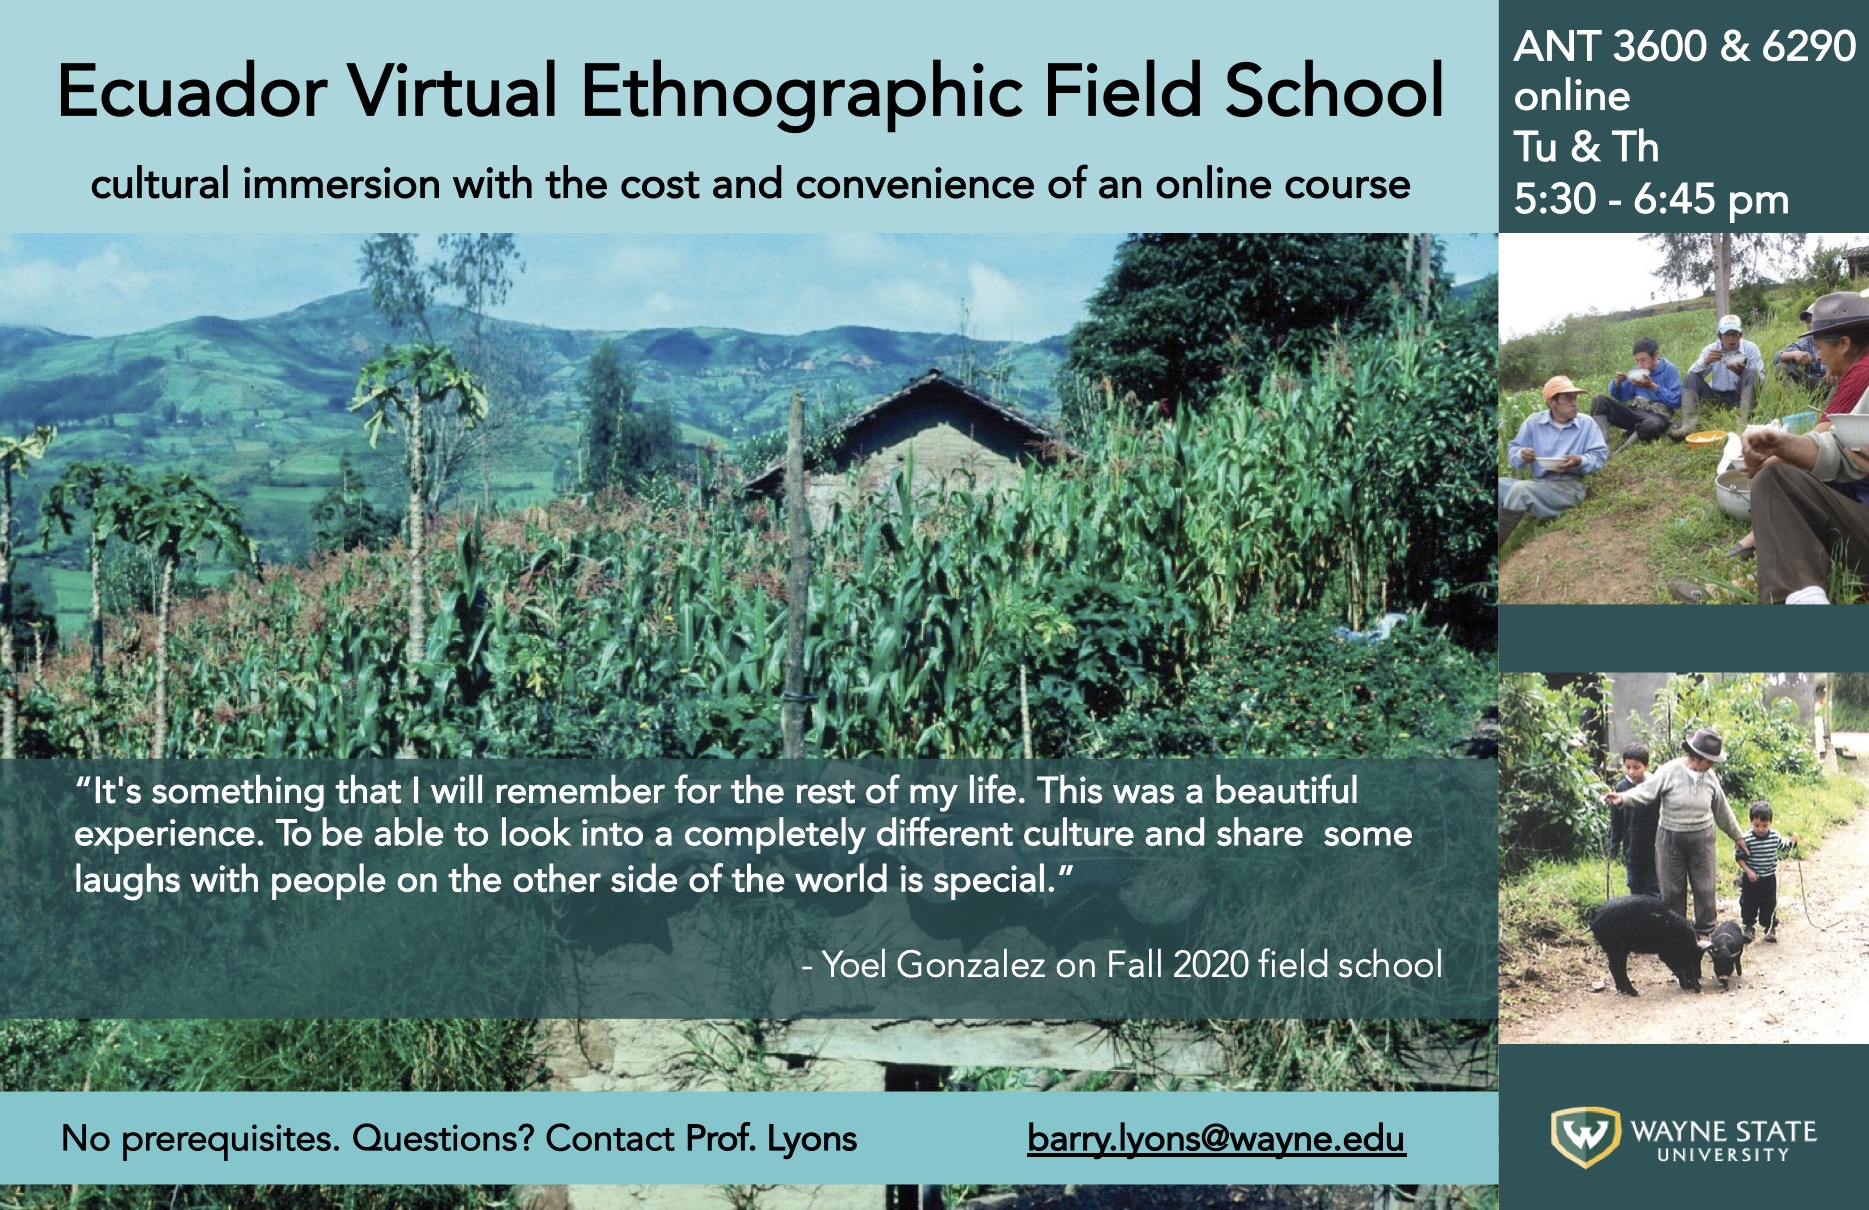 Ecuador Virtual Ethnographic Field School Anthropological field school with the cost and convenience of an online course  If interested contact Dr. Barry Lyons barry.lyons@wayne.edu  Course Description  ANT 3600 and 6290 3 Credit Course  Jan. 11 - May 3 Class meets on Zoom Tu & Th 5:30-6:45 ET  This course taught online from Ecuador, immerses students virtually in the culture of an Andean village. Students connect with villagers through Zoom and WhatsApp, practicing language skills while learning about rural livelihoods and sustainability in the context of climate change and globalization. Develop anthropological research skills, analyze economic and environmental challenges in rural Latin America, improve Spanish language skills, explore and meet requirements in anthropology, global studies, Spanish, Latin American studies, undergraduate and graduate levels. Prerequisites: At least Intermediate-level Spanish fluency & instructor permission.  Contact barry.lyons@wayne.edu  Location  San Vicente de Bolí­var is a Spanish-speaking village in the Andes mountains, at 8,000 feet above sea level. Farmers in San Vicente grow corn on modest plots they own or sharecrop. They face multiple challenges including low prices for their corn, declining agricultural fertility, new crop diseases, dependence on expensive and harmful chemical fertilizers and pesticides, and disruptions to normal weather patterns associated with climate change. Our research aims to understand the social and cultural dimensions of these challenges and ultimately help to develop economically and environmentally sustainable responses.